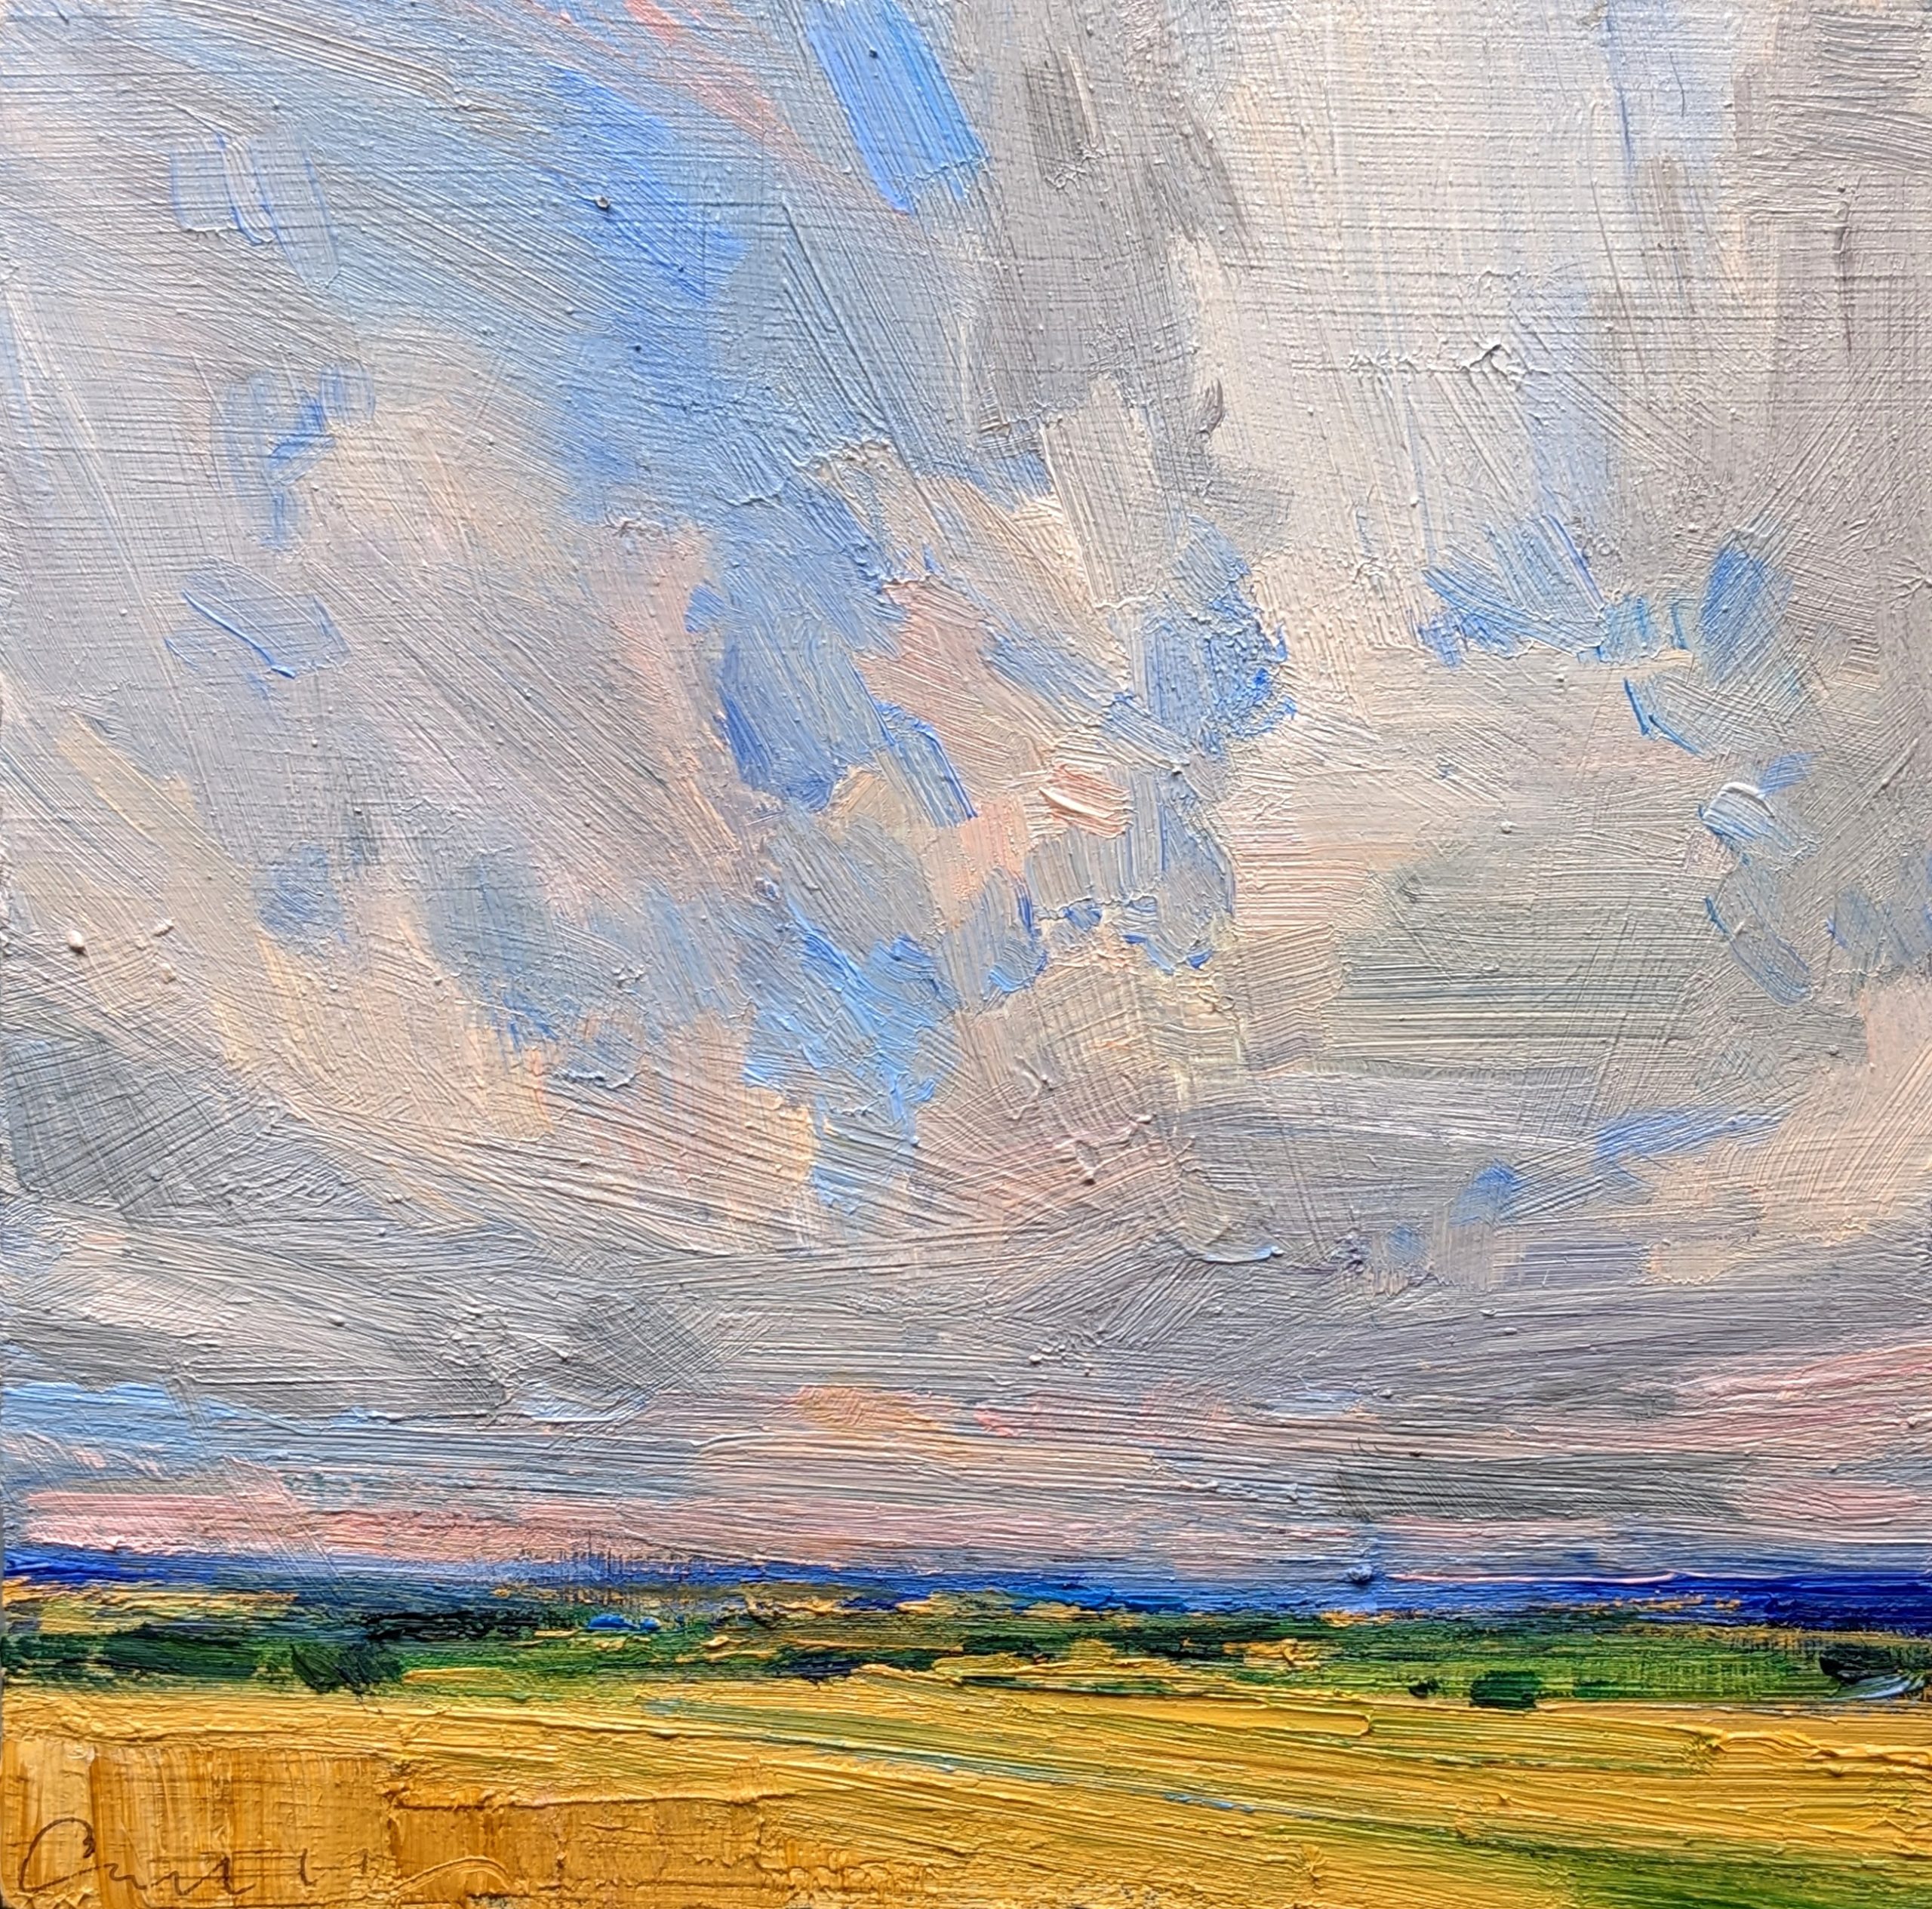 Soft Summer Sky, original painting by Emerson Mayes